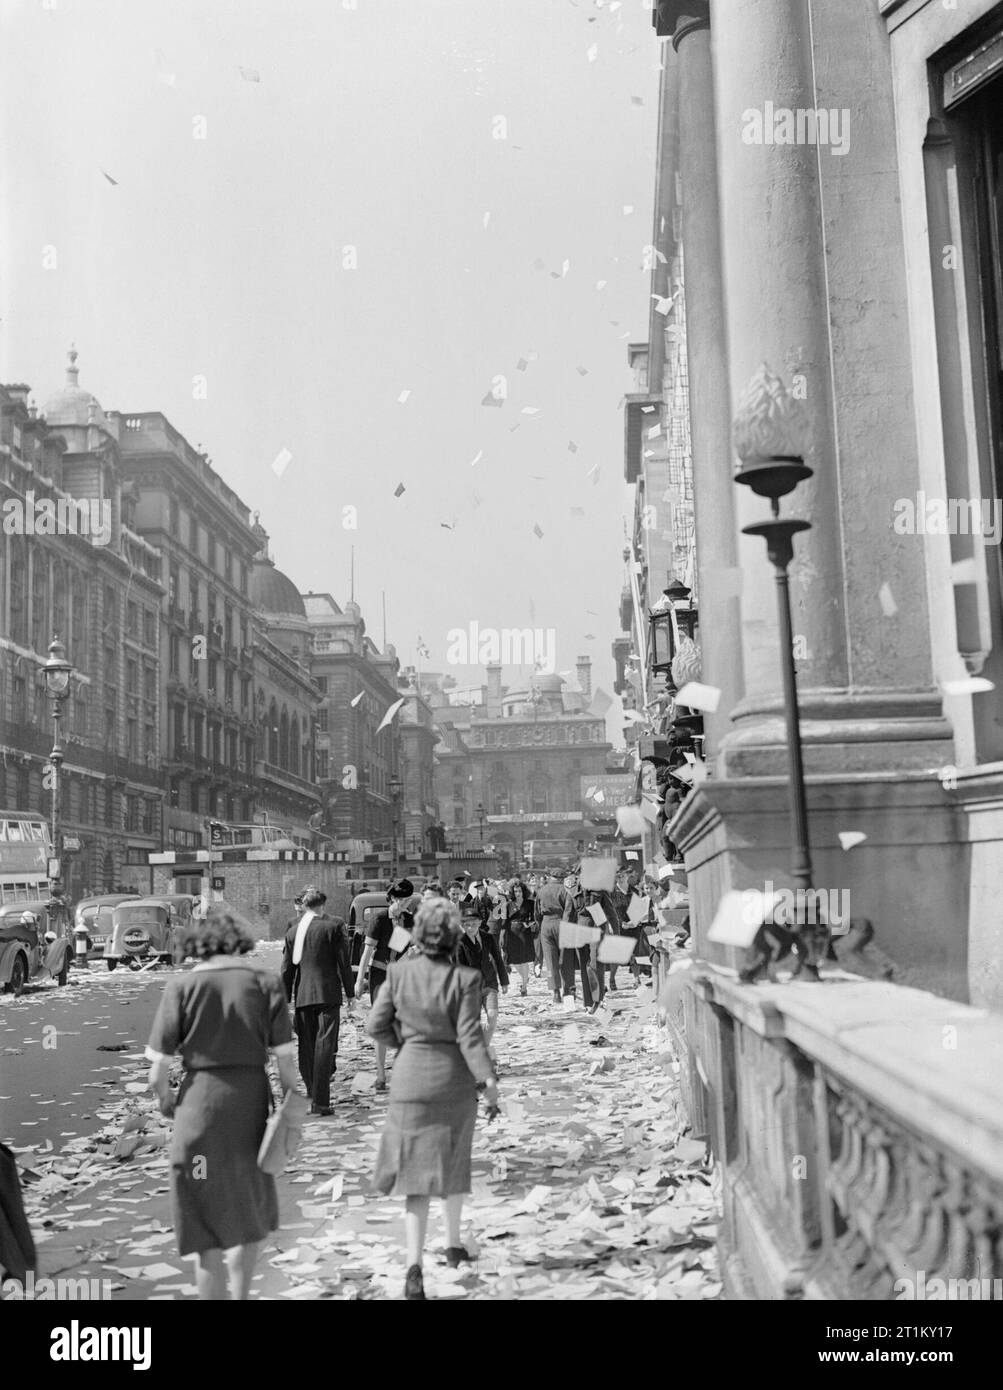 Britain Hears News of End of Jap War- Celebrating Victory in Japan, London, England, UK, c 15 August 1945 Civilians walk amongst the piles of torn up paper which have been thrown, 'ticker tape'-style, from the windows of offices, on Lower Regent Street, London, to celebrate the signing of the Peace with Japan. More paper can be seen fluttering down onto the pavement and road: many vehicles appear to have stopped. It appears that this photograph was taken on Lower Regent Street, looking back up towards Piccadilly Circus. In the middle of the road (left of the photograph), a brick surface shelte Stock Photo